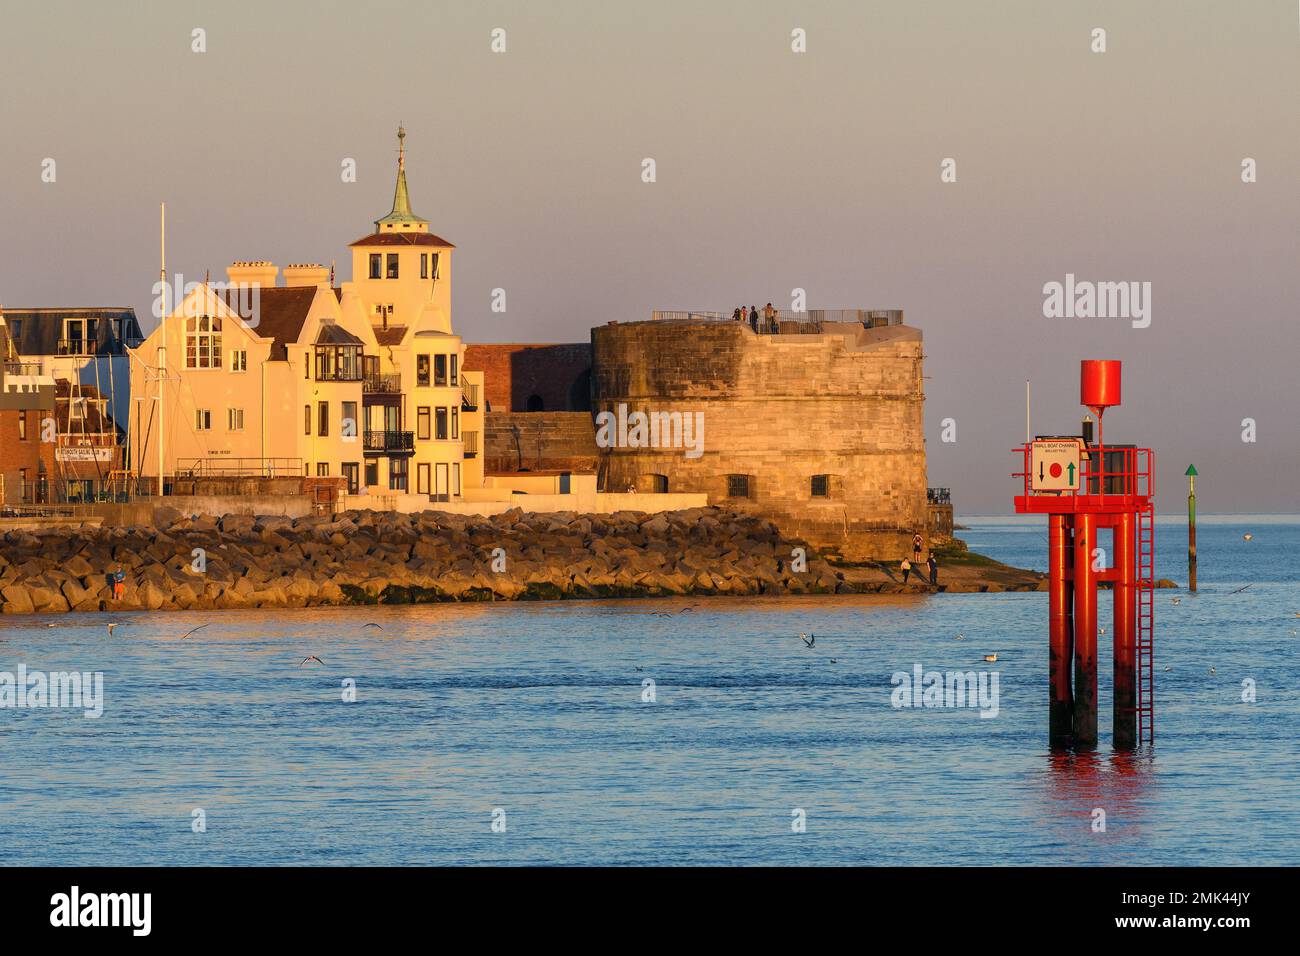 A sunset view of the Round Tower and Tower House at the entrance to Portsmouth Harbour. Stock Photo